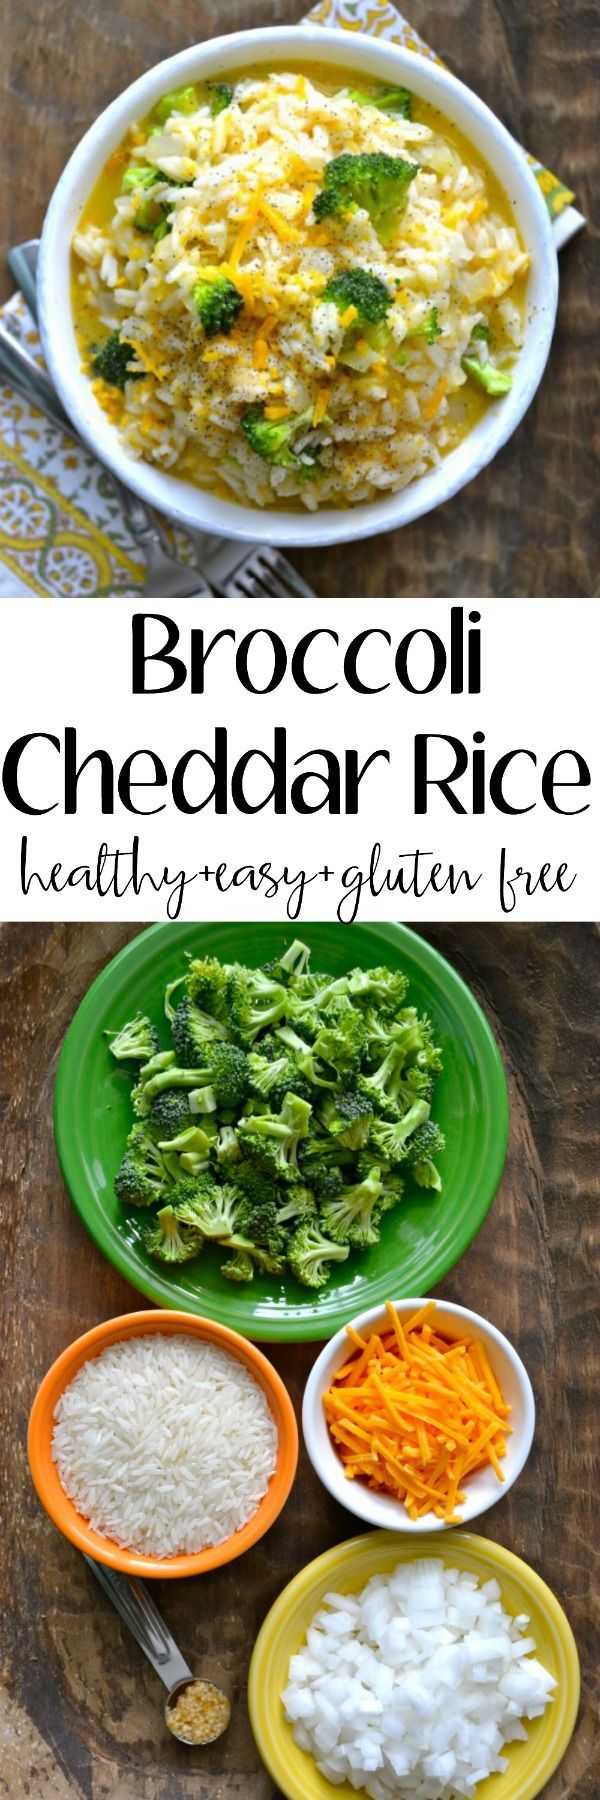 Creamy Broccoli Cheddar Rice!! This is the ultimate comfort food! Perfect as an easy side dish or a vegetarian meal! Loaded with sharp cheddar, tender rice and fresh broccoli! Gluten free! -   23 gluten free rice recipes
 ideas